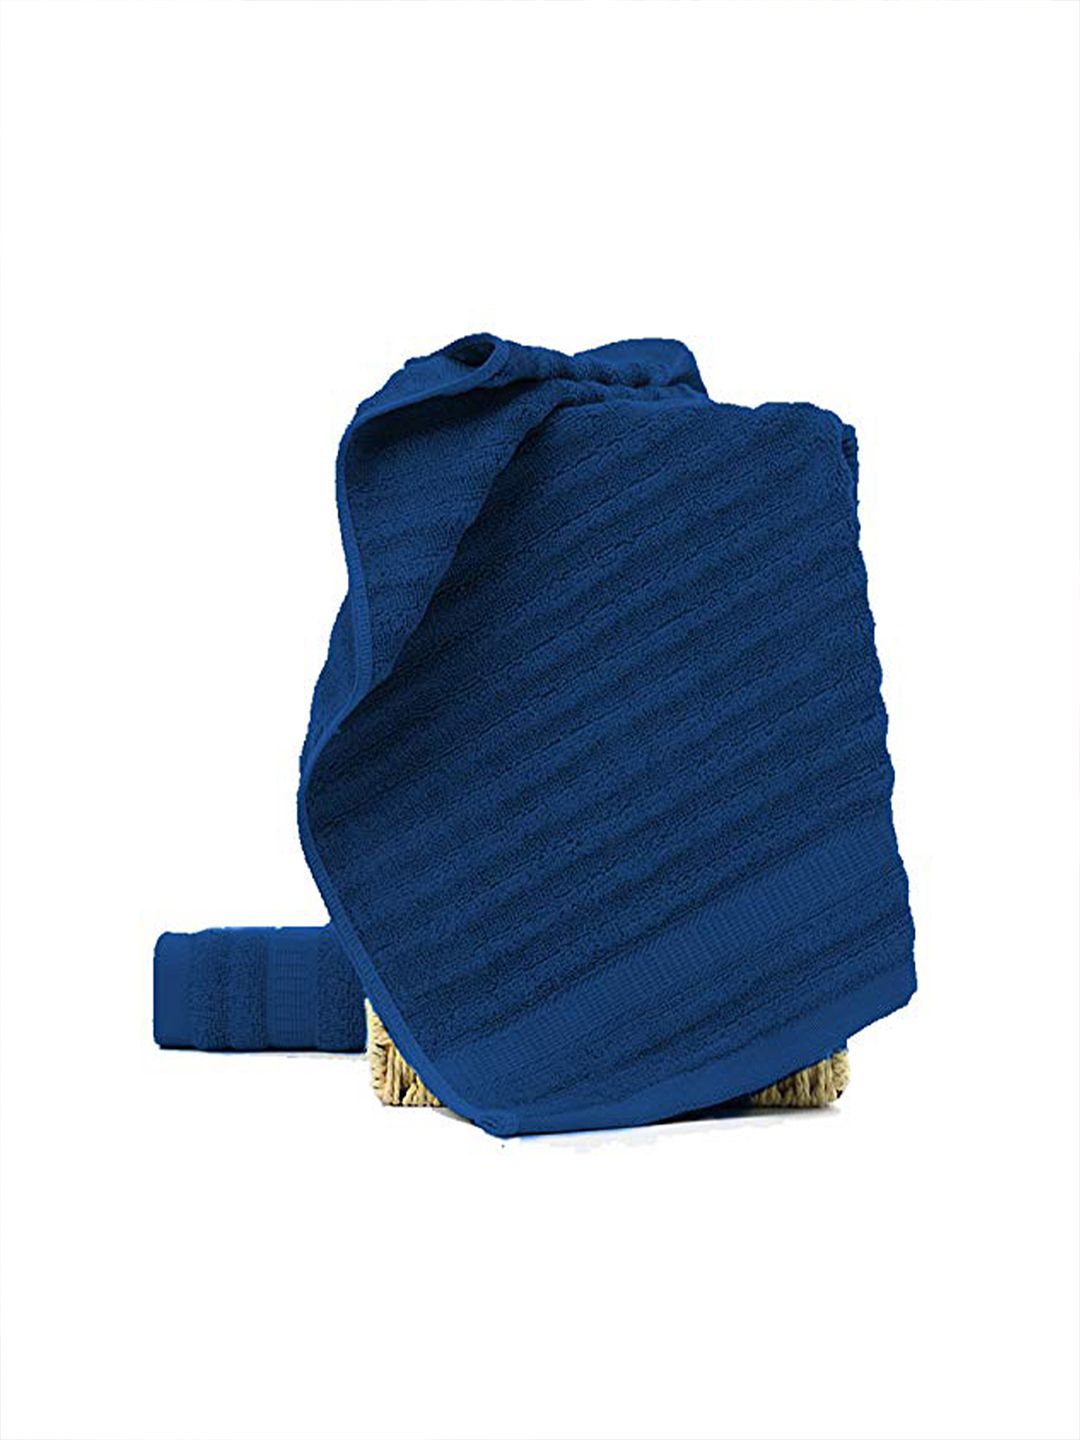 MUSH Set Of 2 Navy Blue Ultra Soft & Eco Friendly Bamboo Hand Towel Price in India